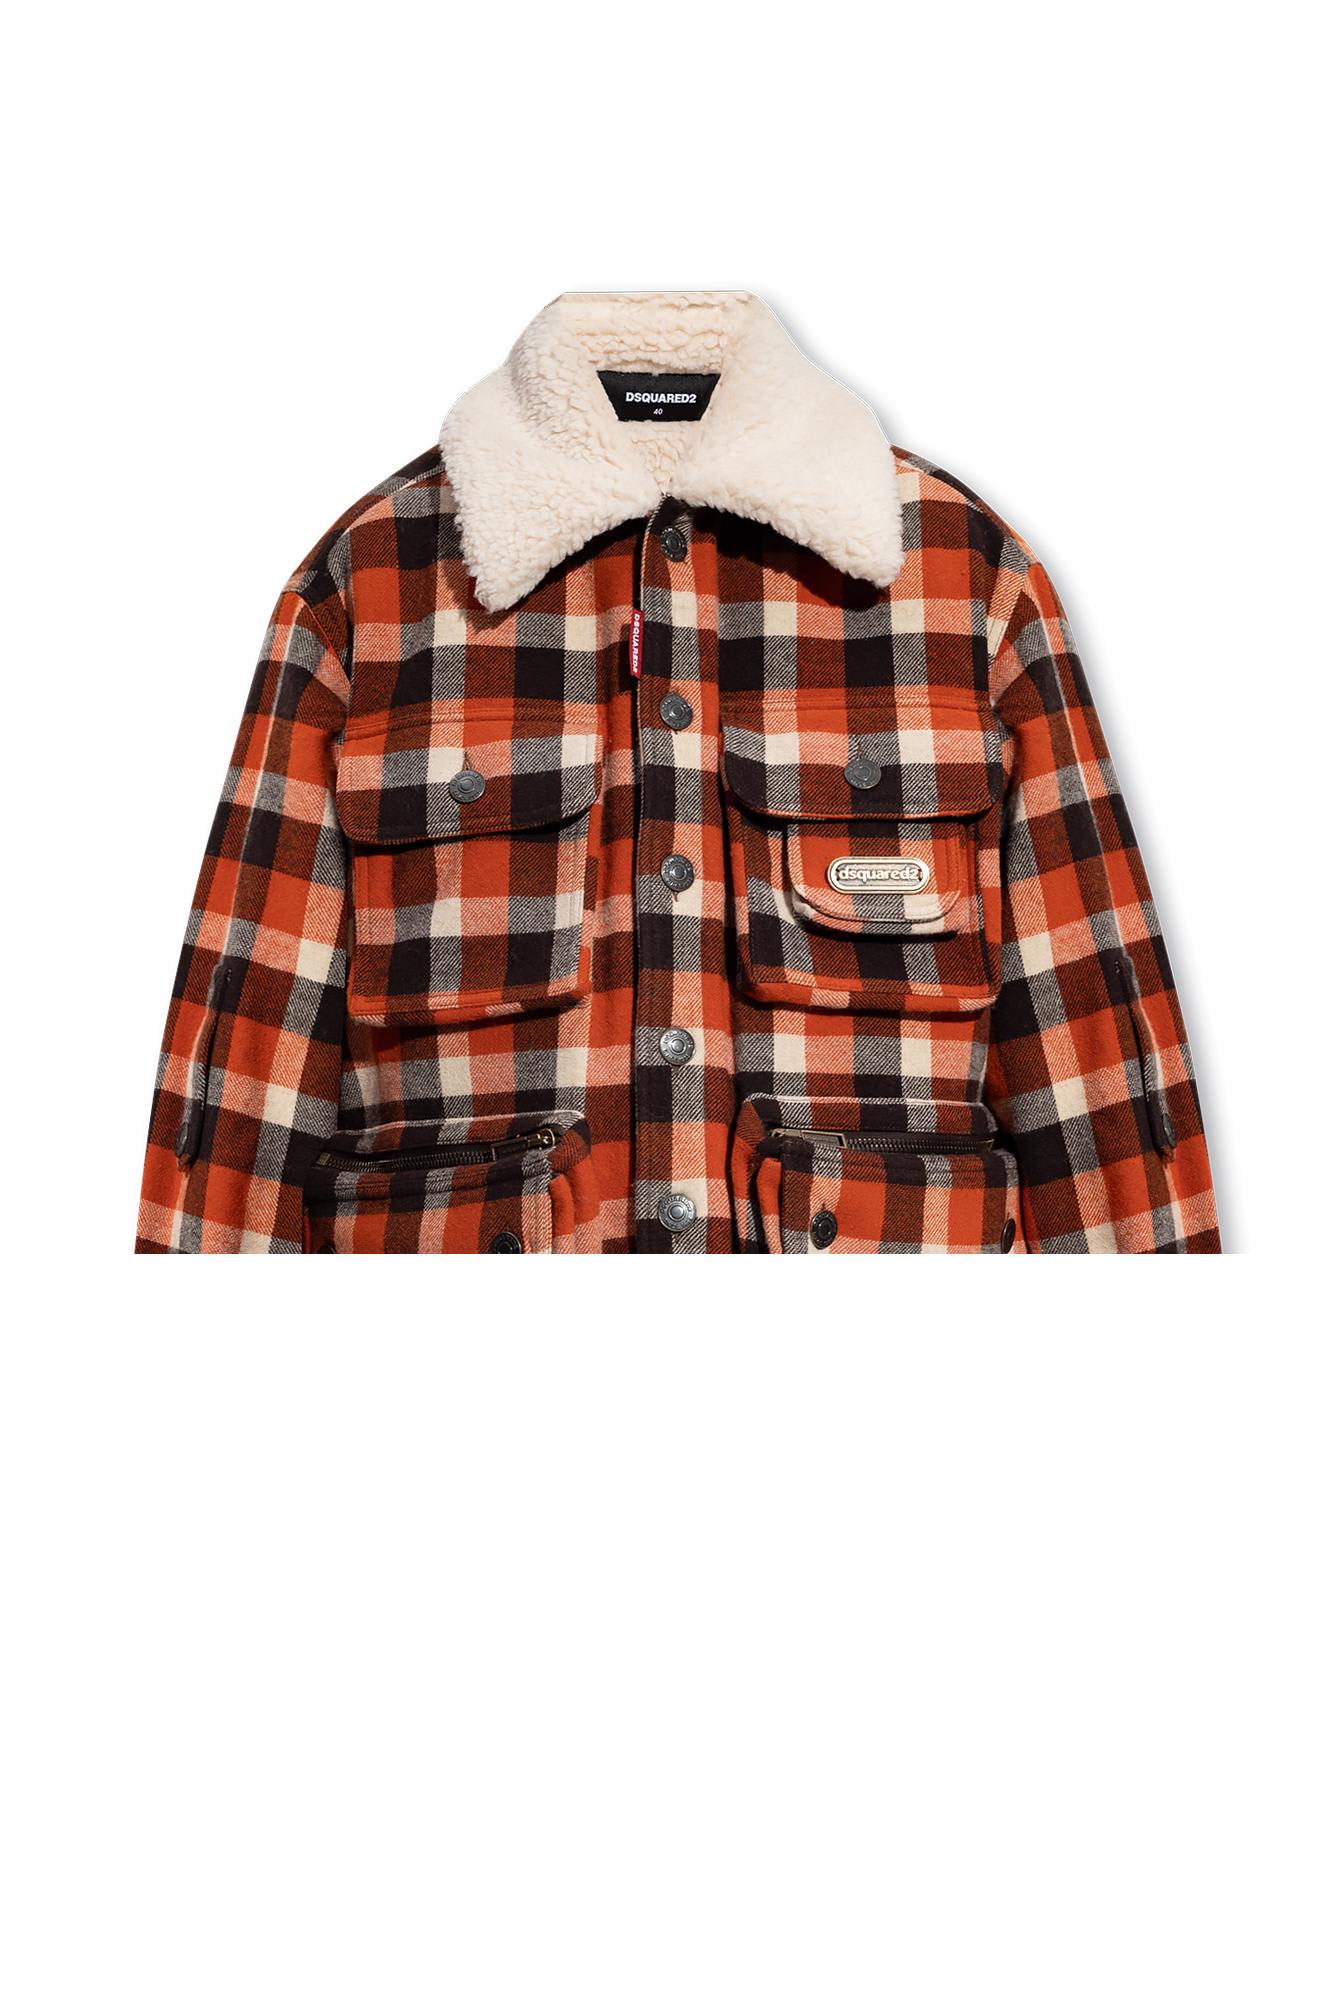 DSQUARED2 CHECKED JACKET